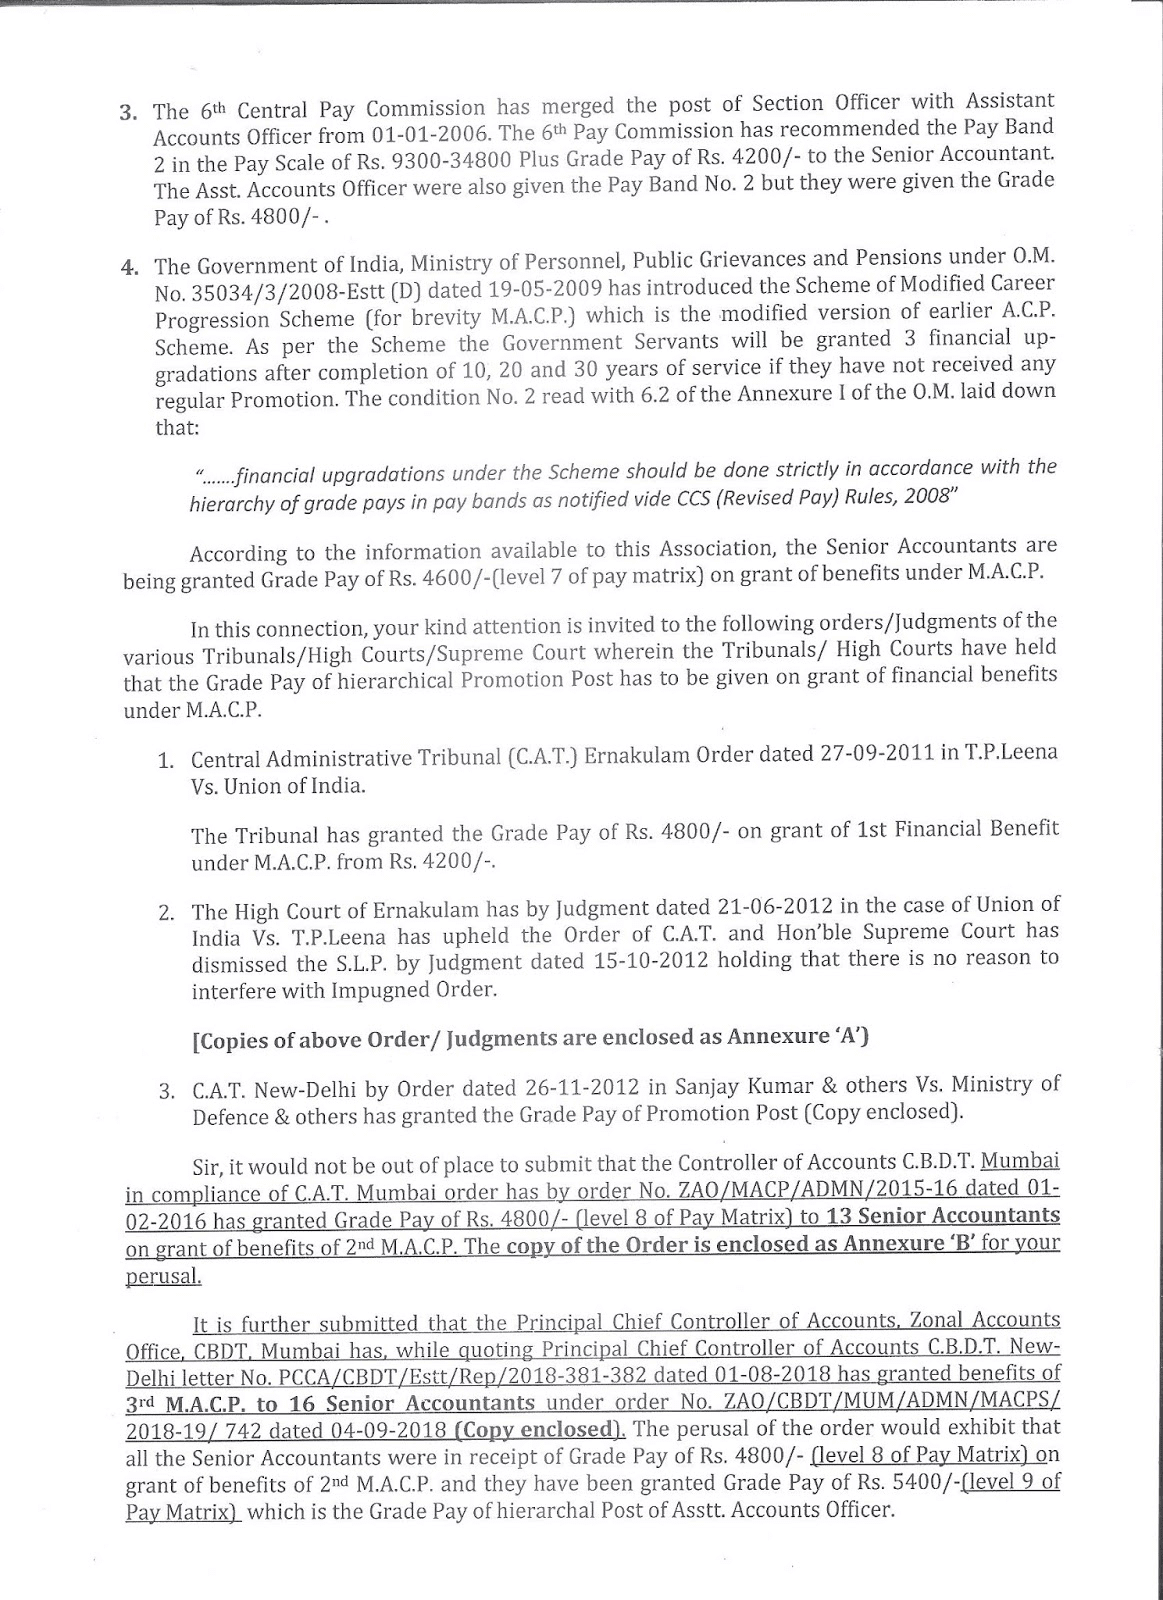 Grant of MACP on Hierarchy to the GP of Rs. 4800 and 5400 to all Sr AO ...